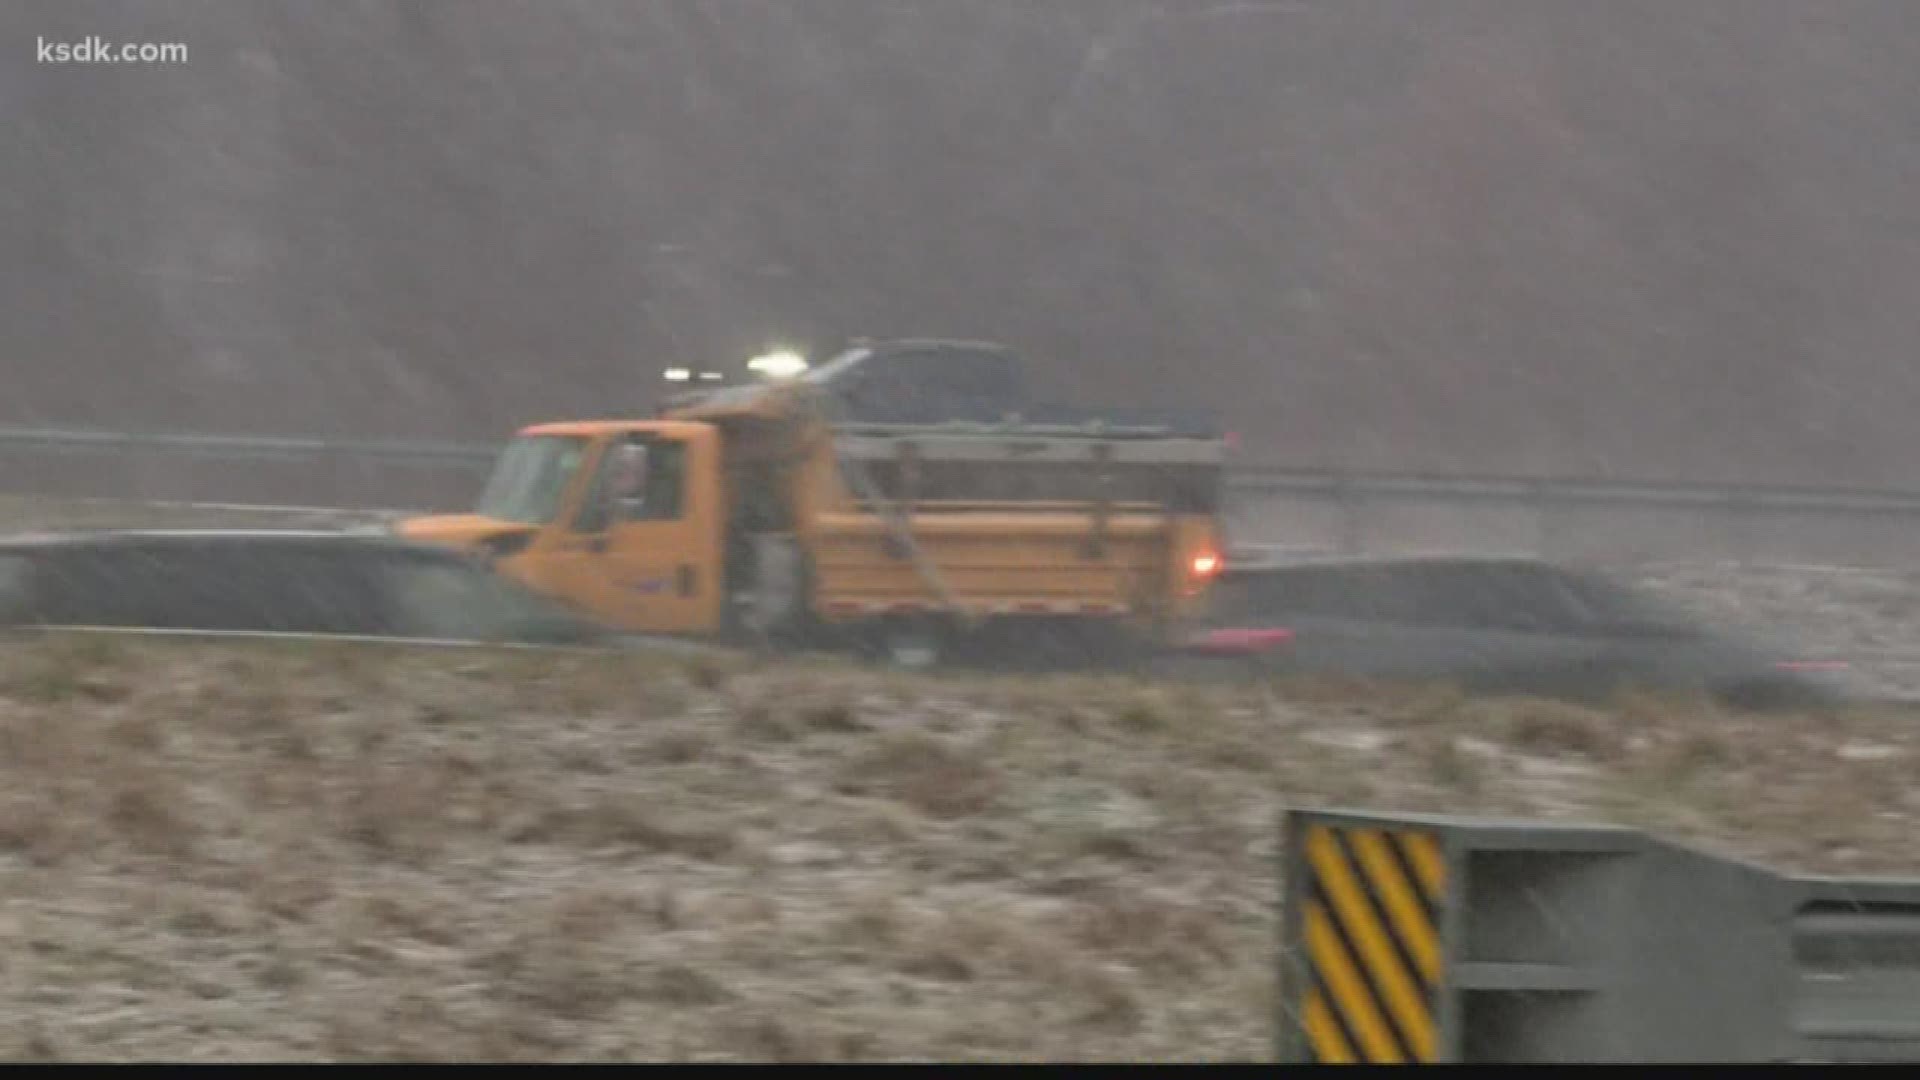 MoDOT has been out in full force to make sure the roads stay safe